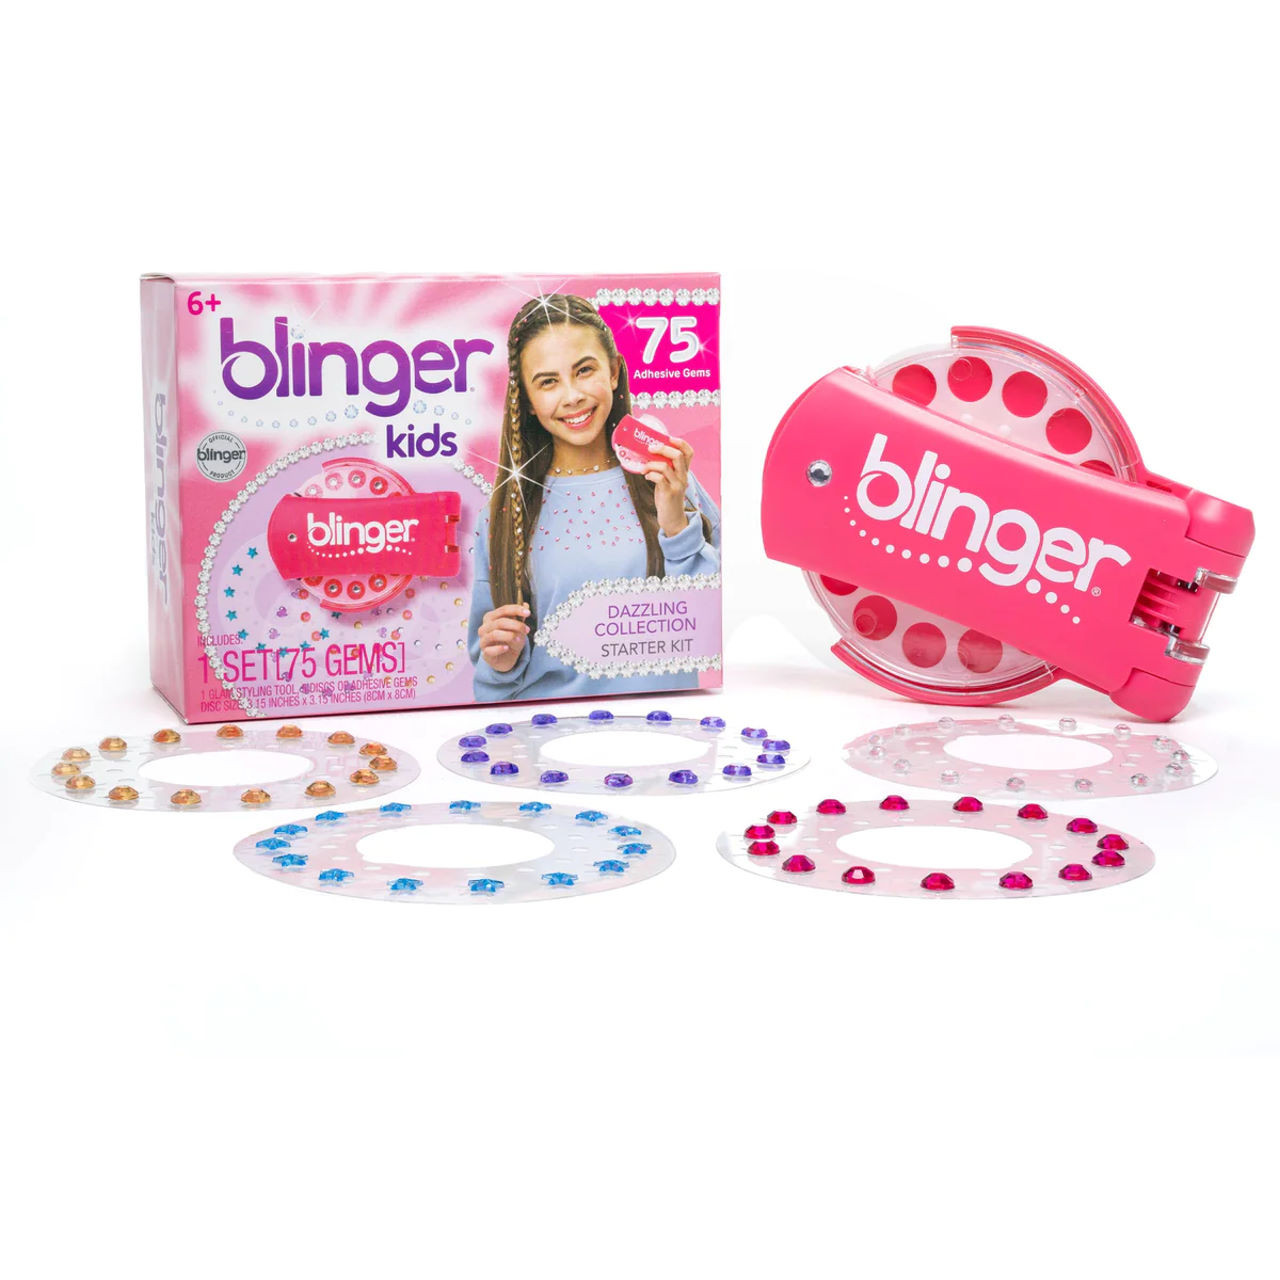 Blinger Diamond Collection Glam Styling Tool - Load, Click, Bling